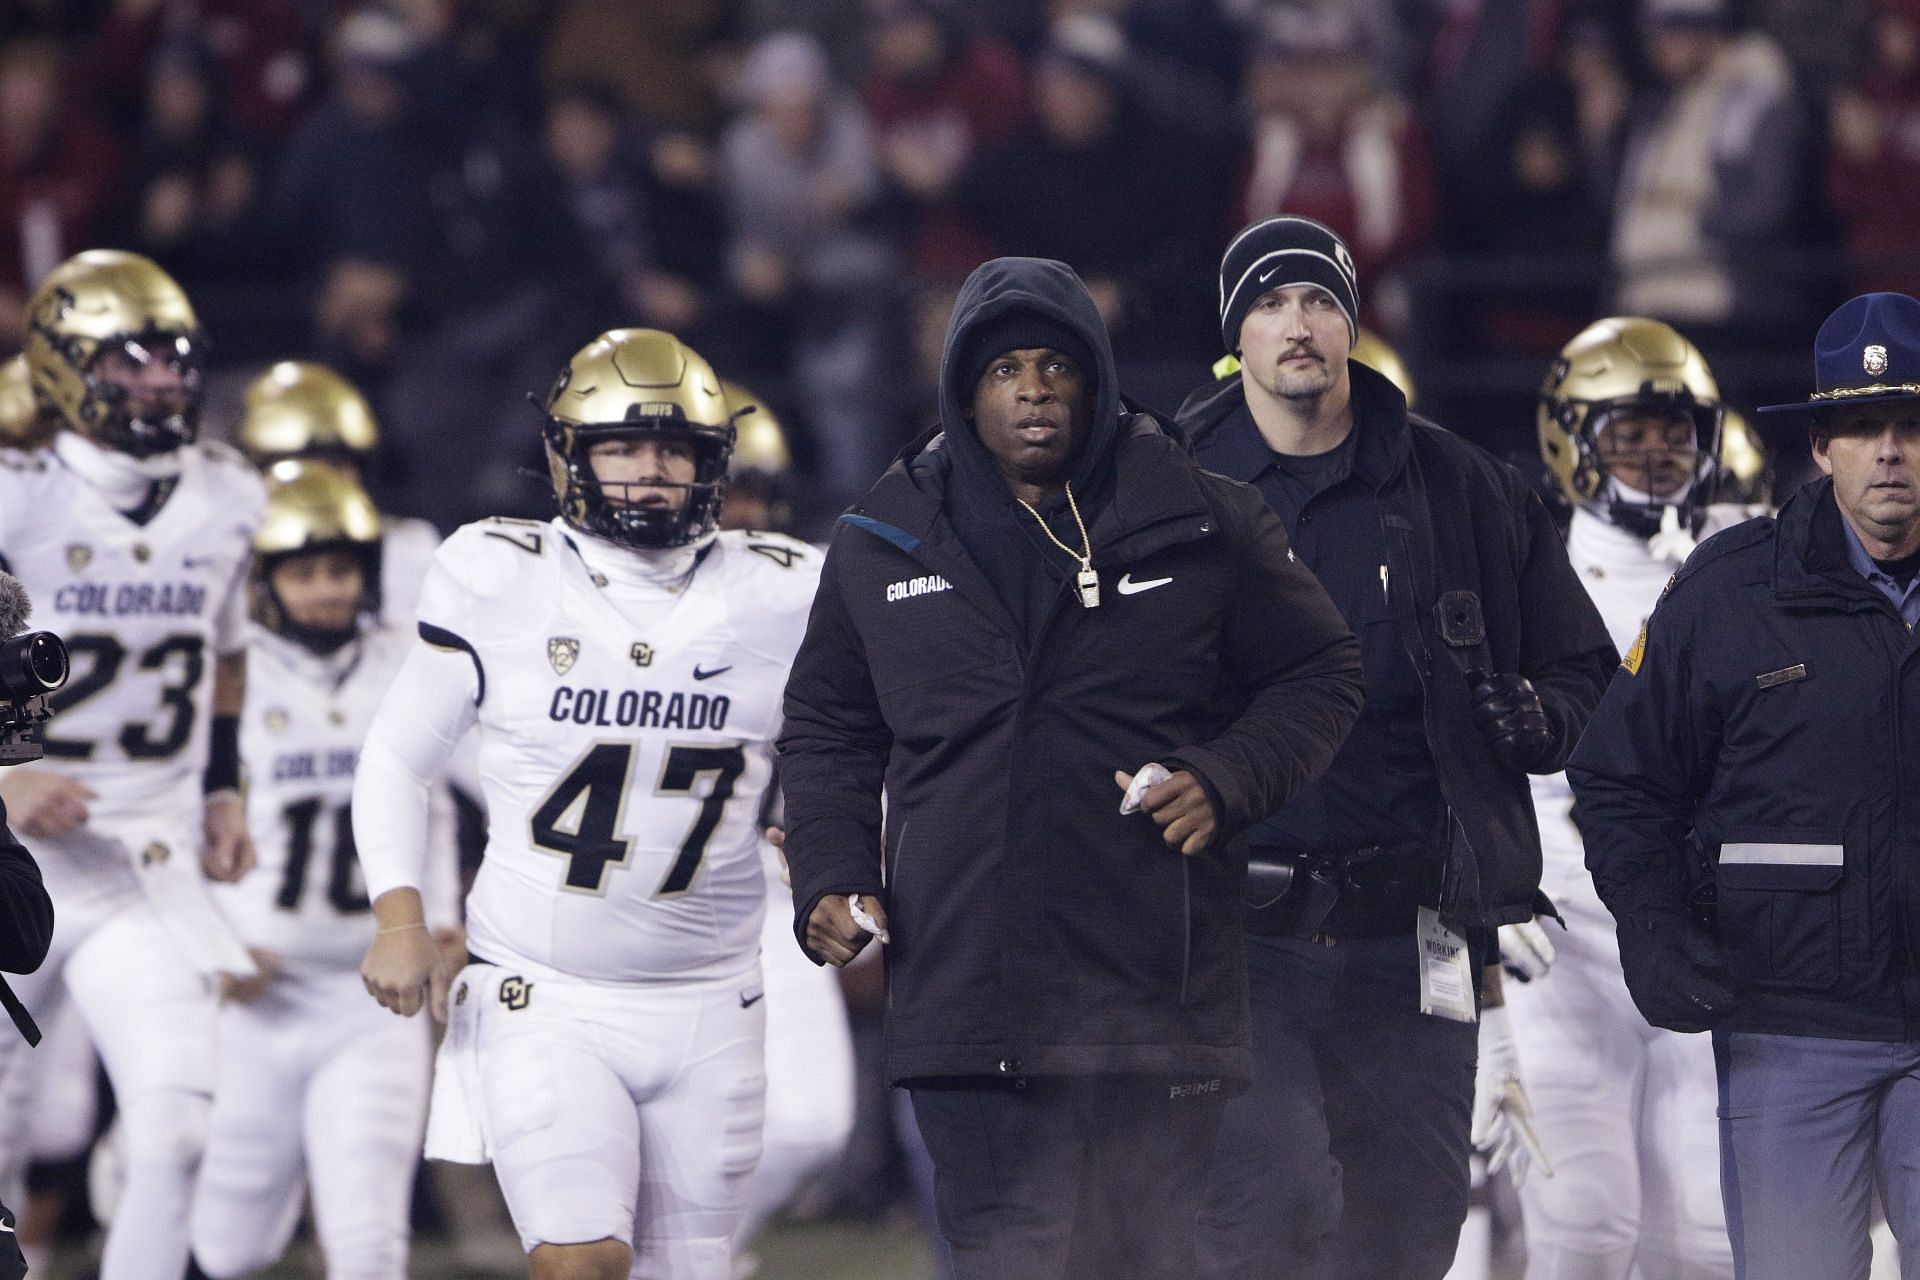 Colorado Washington St Football: Colorado coach Deion Sanders, center, runs out with the team before an NCAA college football game against Washington State, Friday, Nov. 17, 2023, in Pullman, Wash. (AP Photo/Young Kwak)